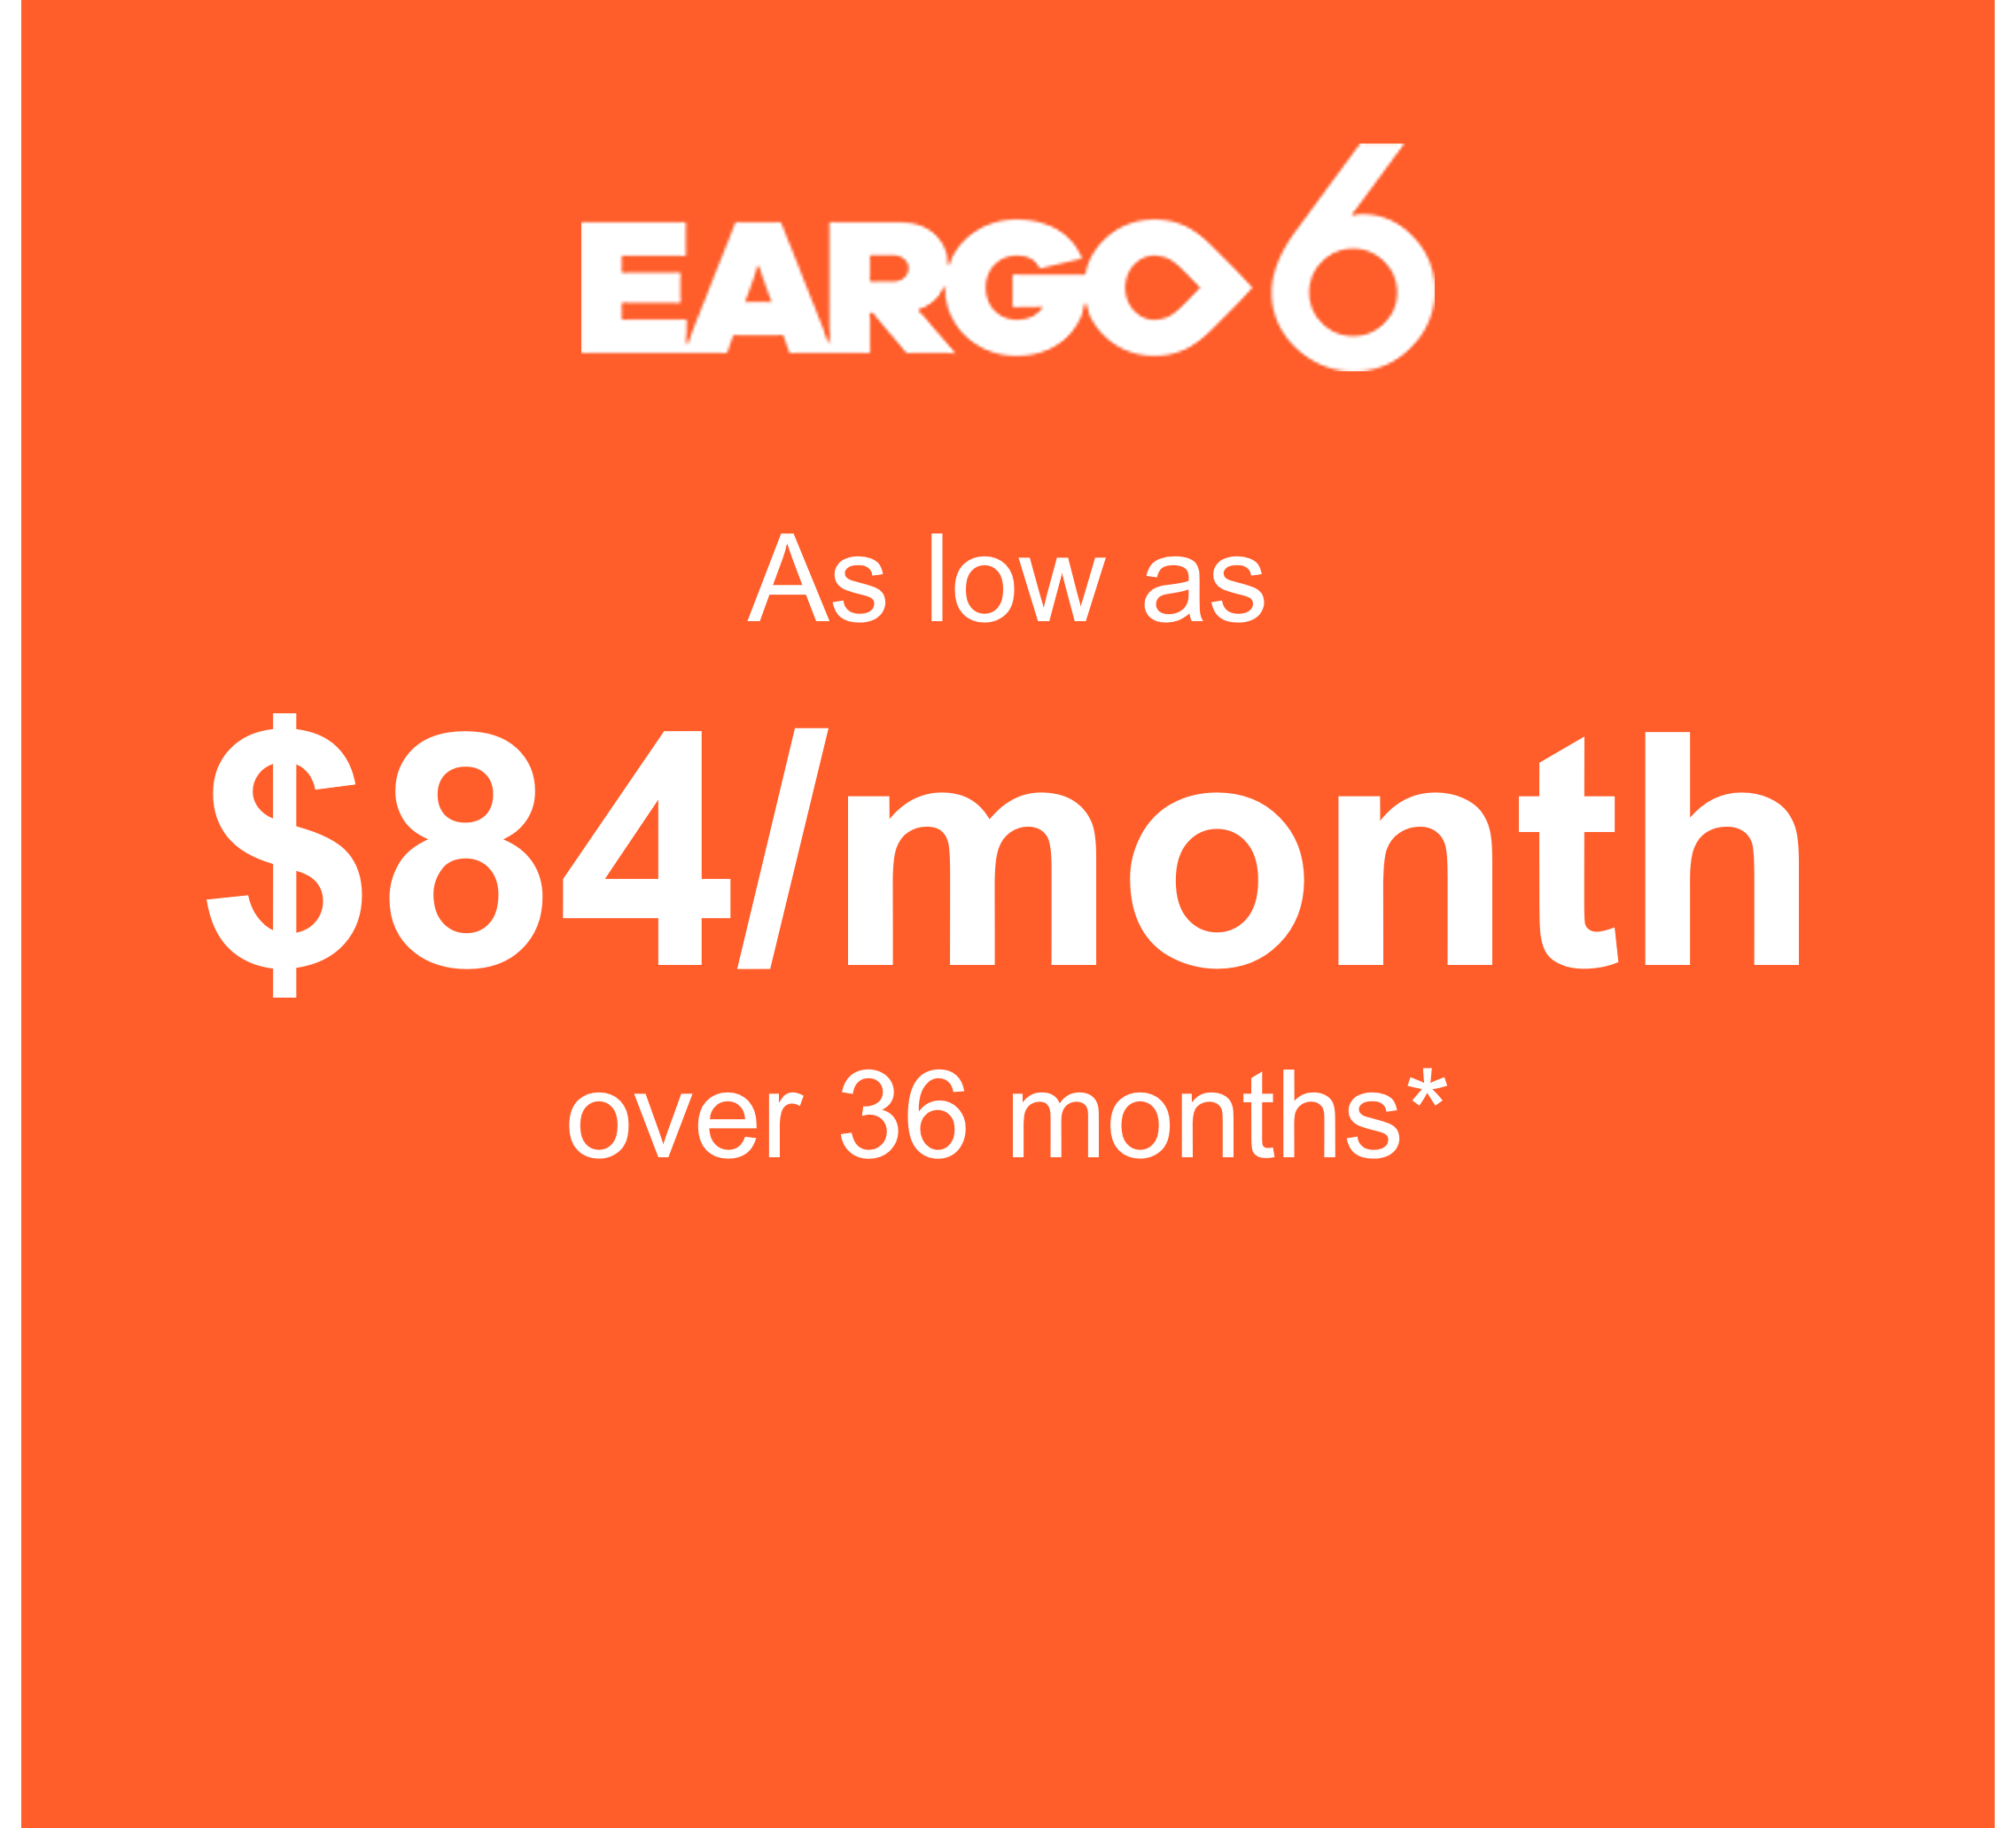 As low as $84/month over 36 months with 9.99% APR